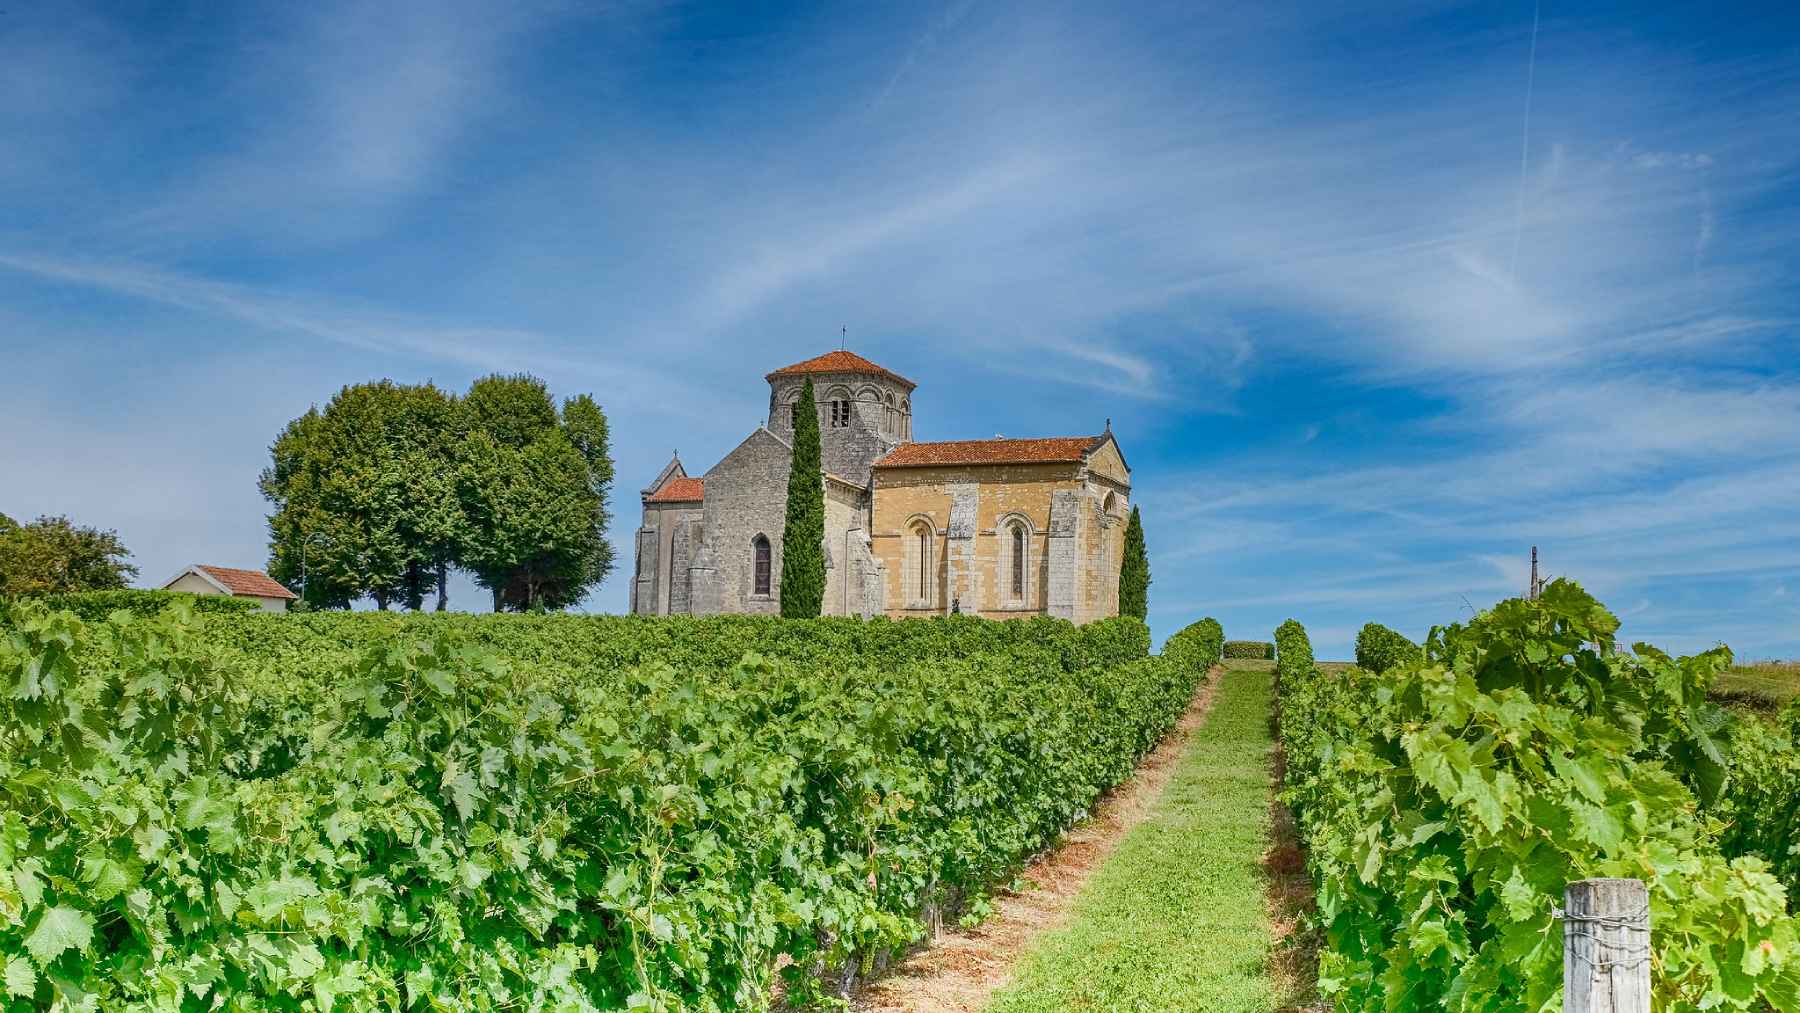 Chateau in the middle of vineyards